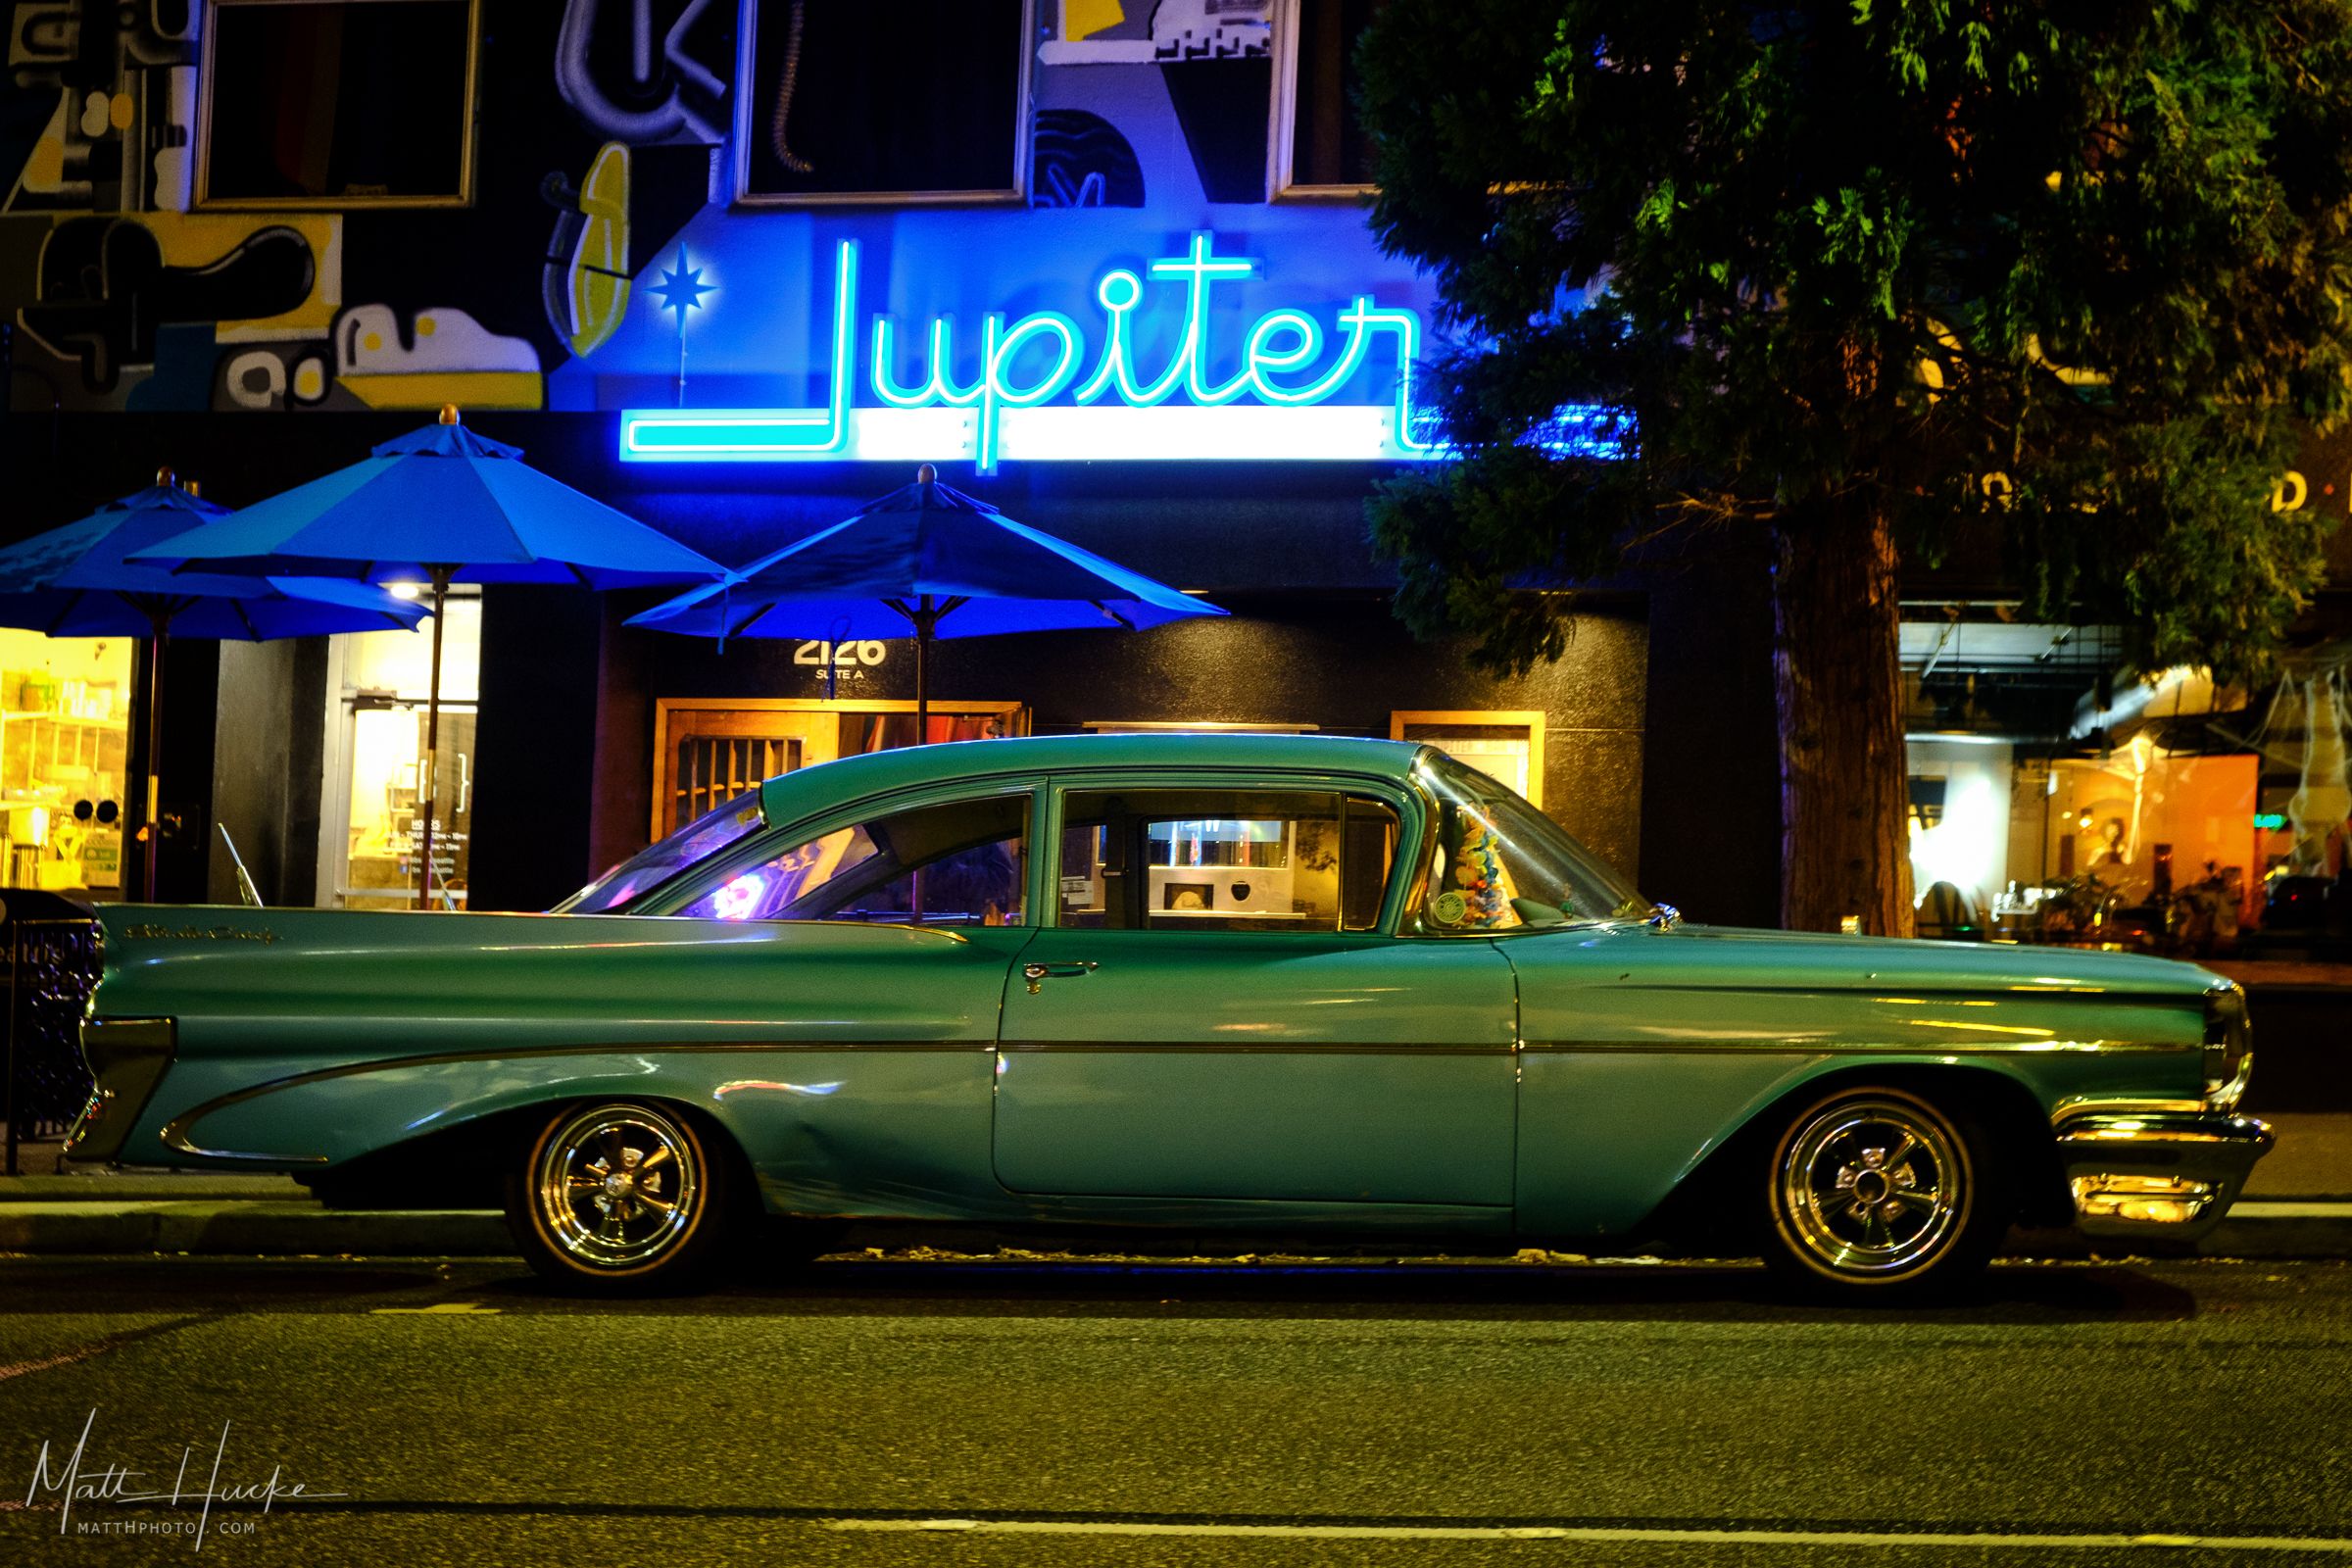 Photo of the neon sign in front of the Jupiter Bar in Seattle.